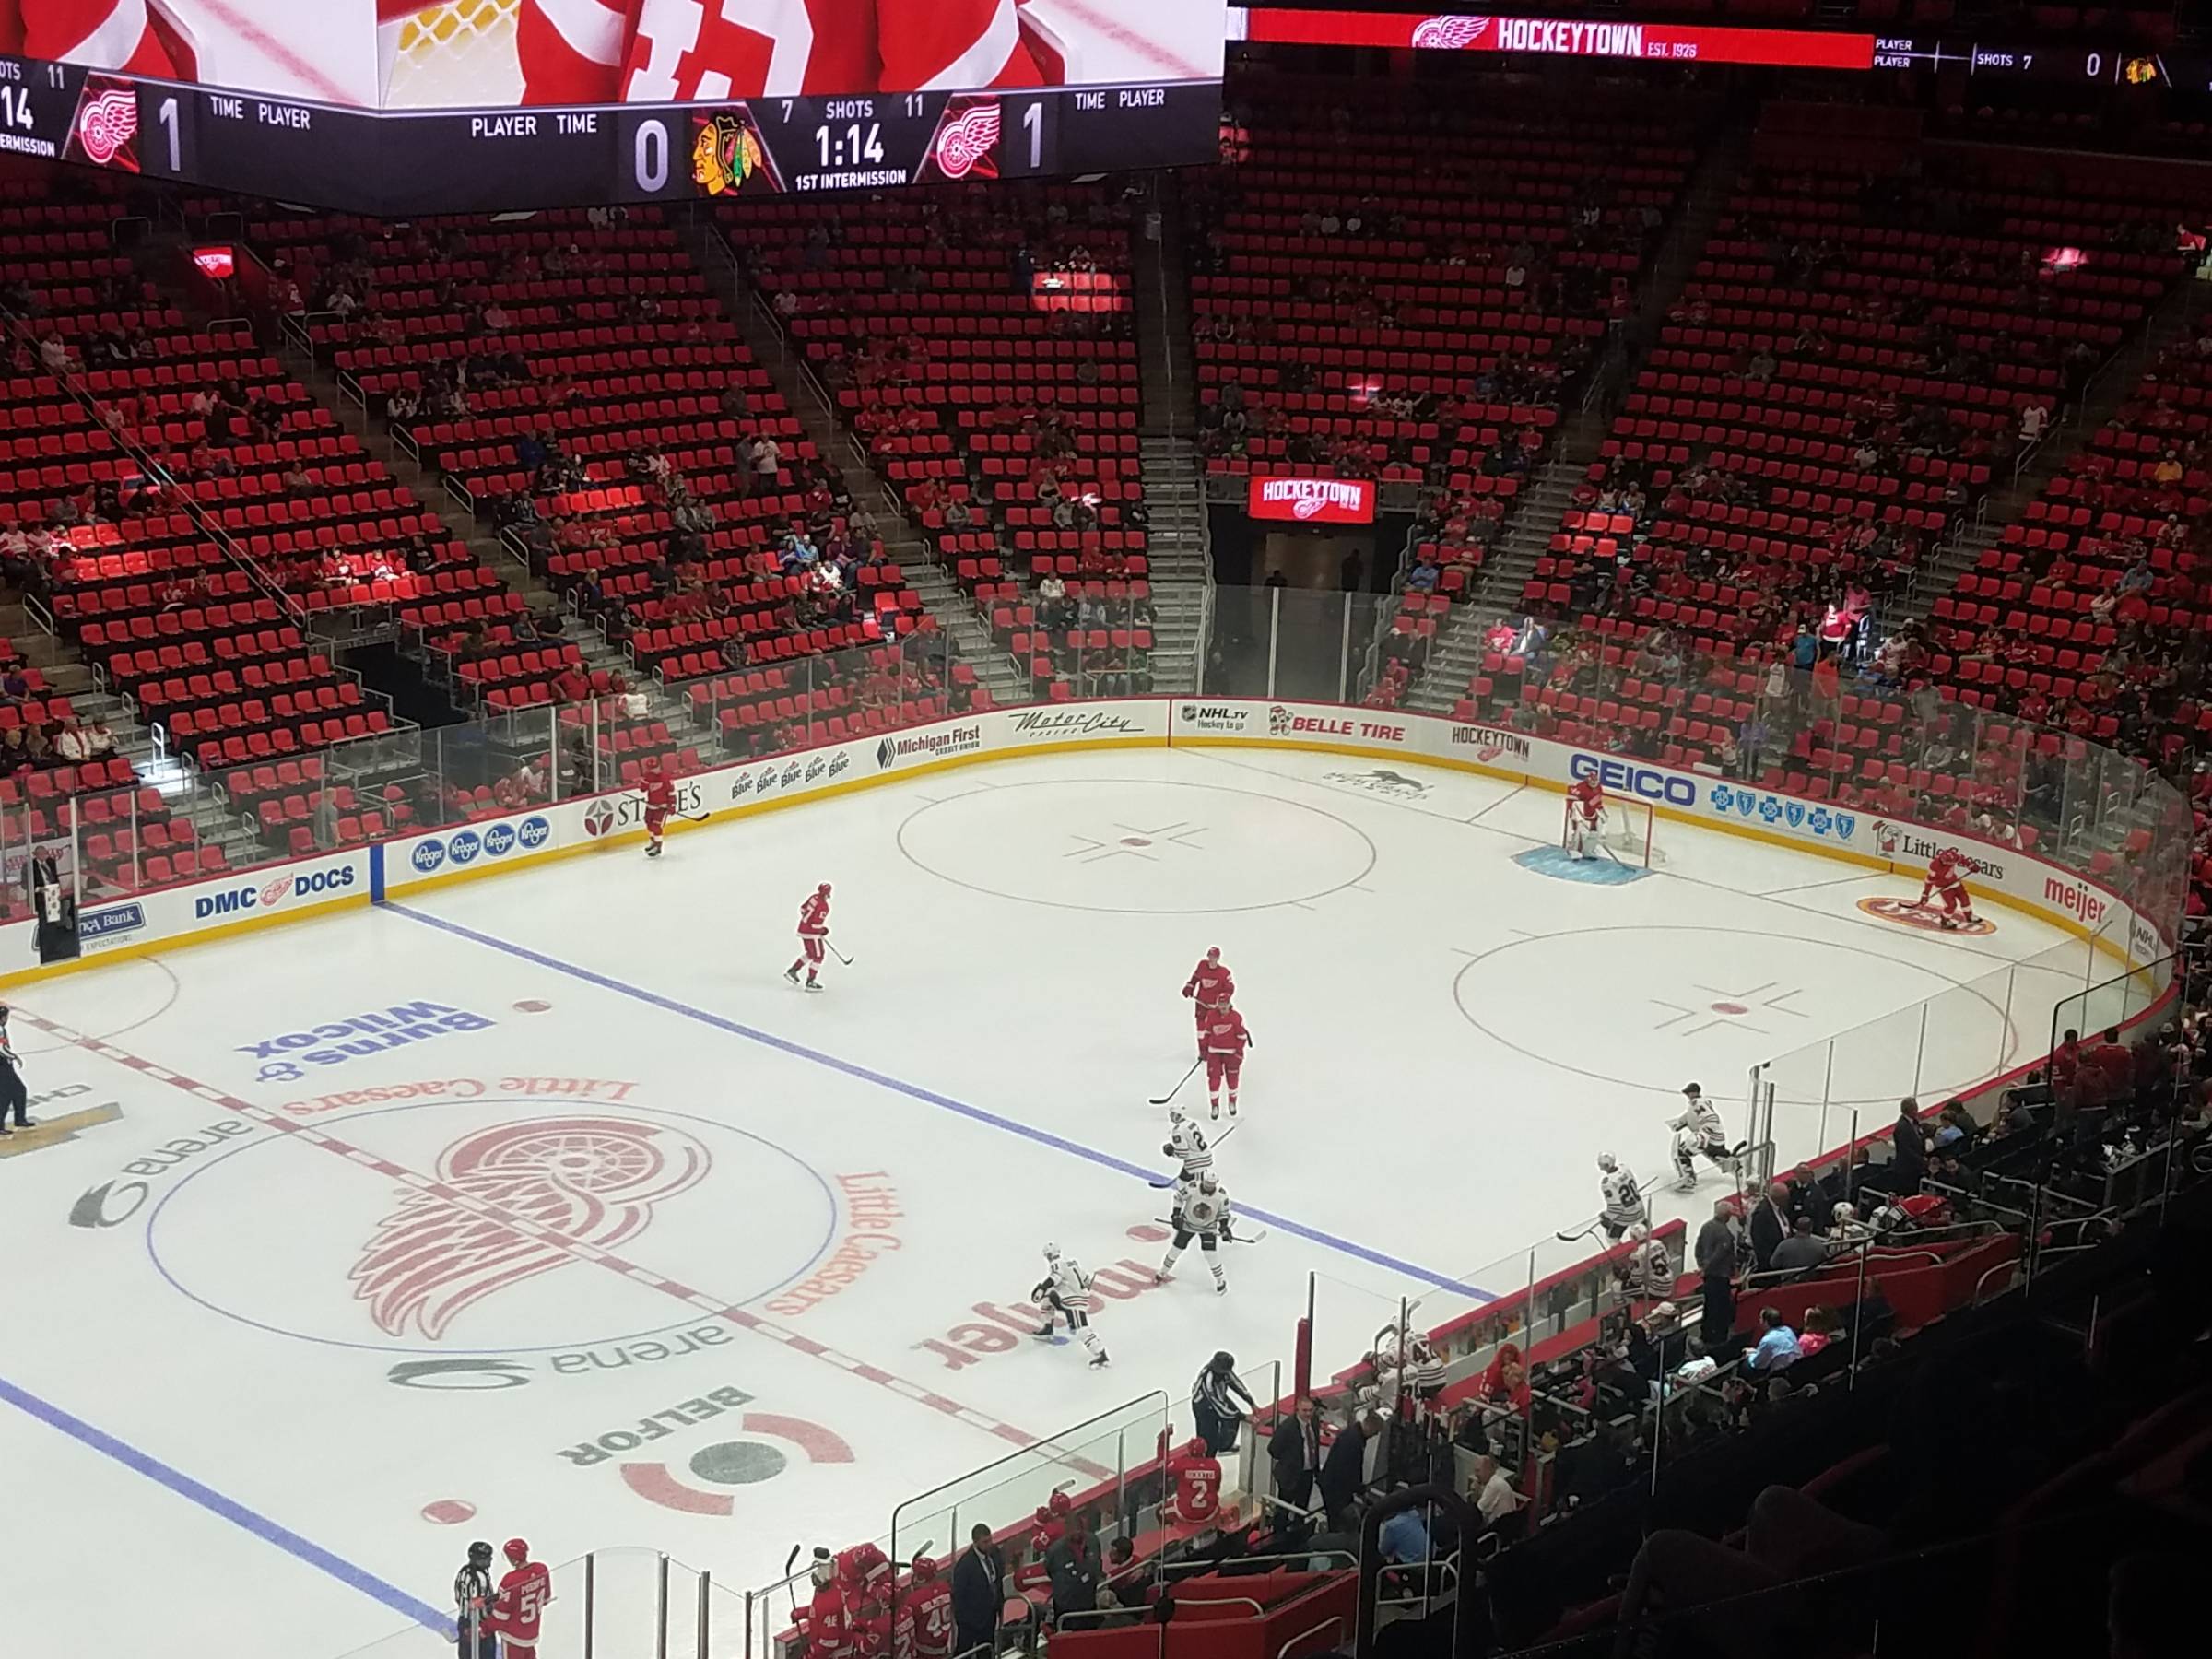 Little Caesars Arena to Host Blood Drive With Red Cross, Anheuser